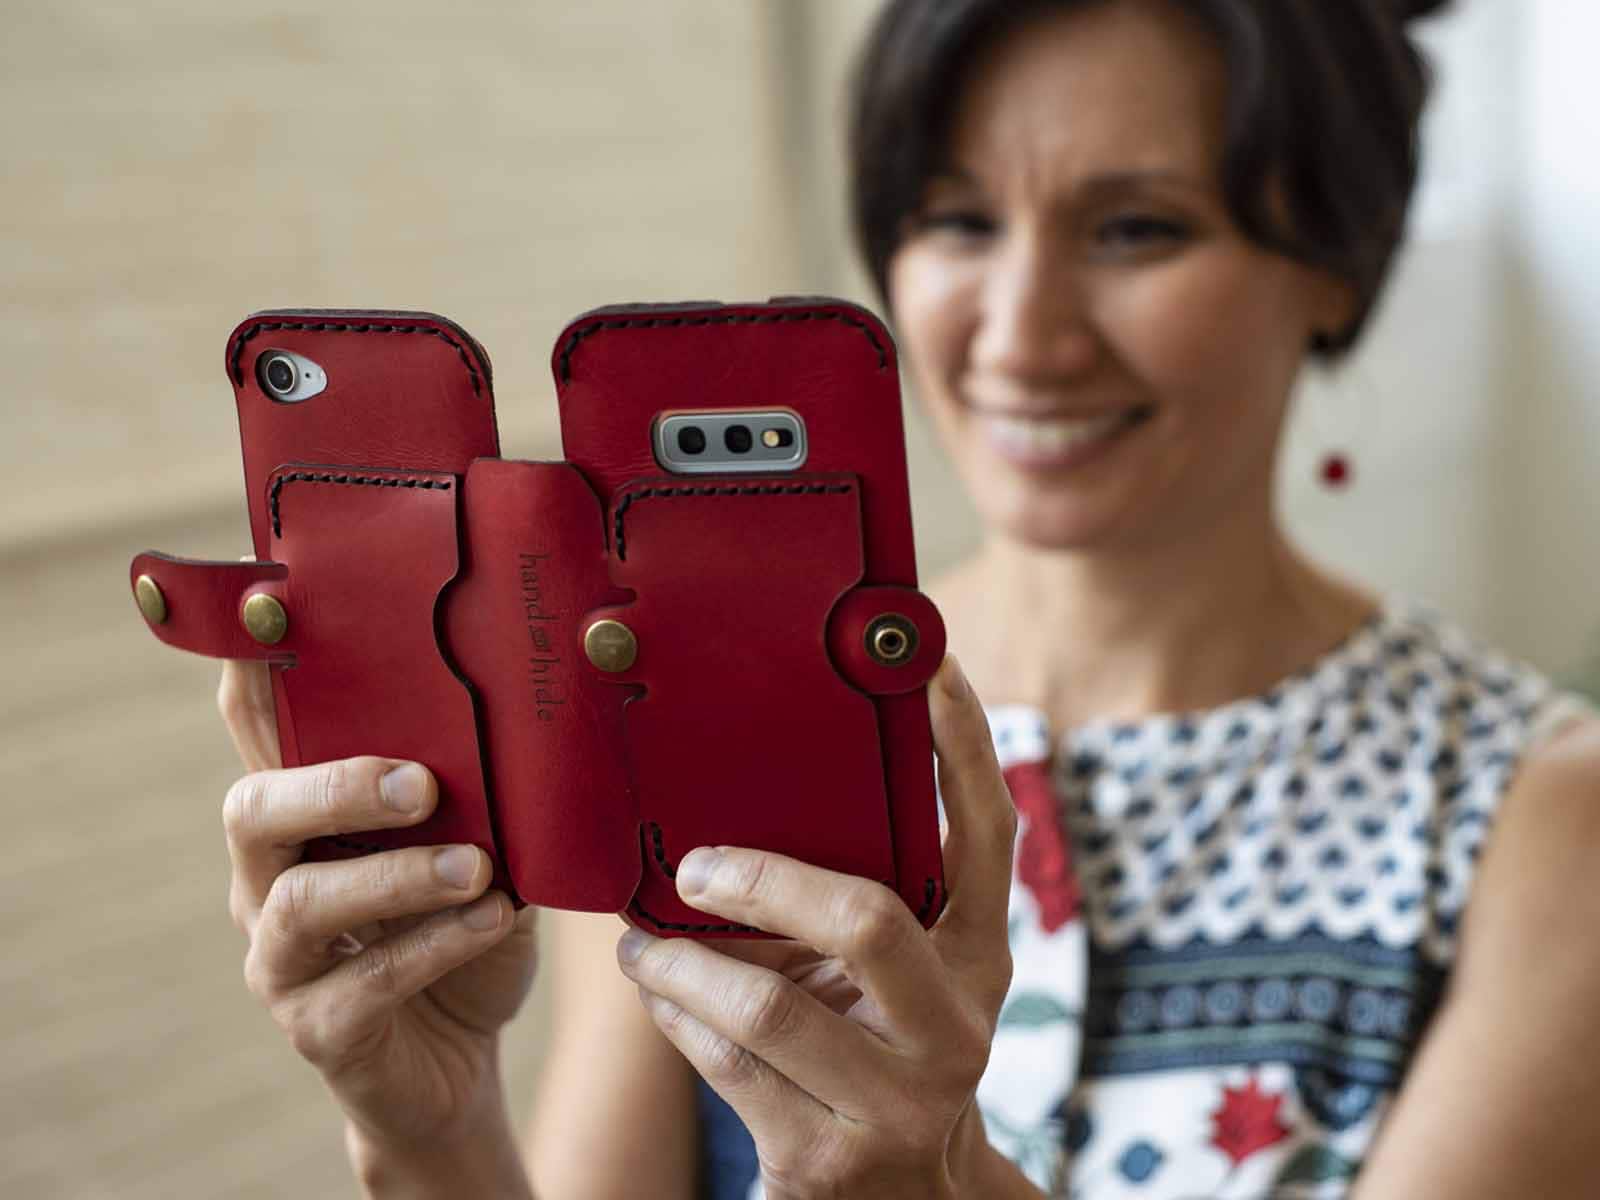 17 Best Leather Phone Cases You Won't Want To Put Down